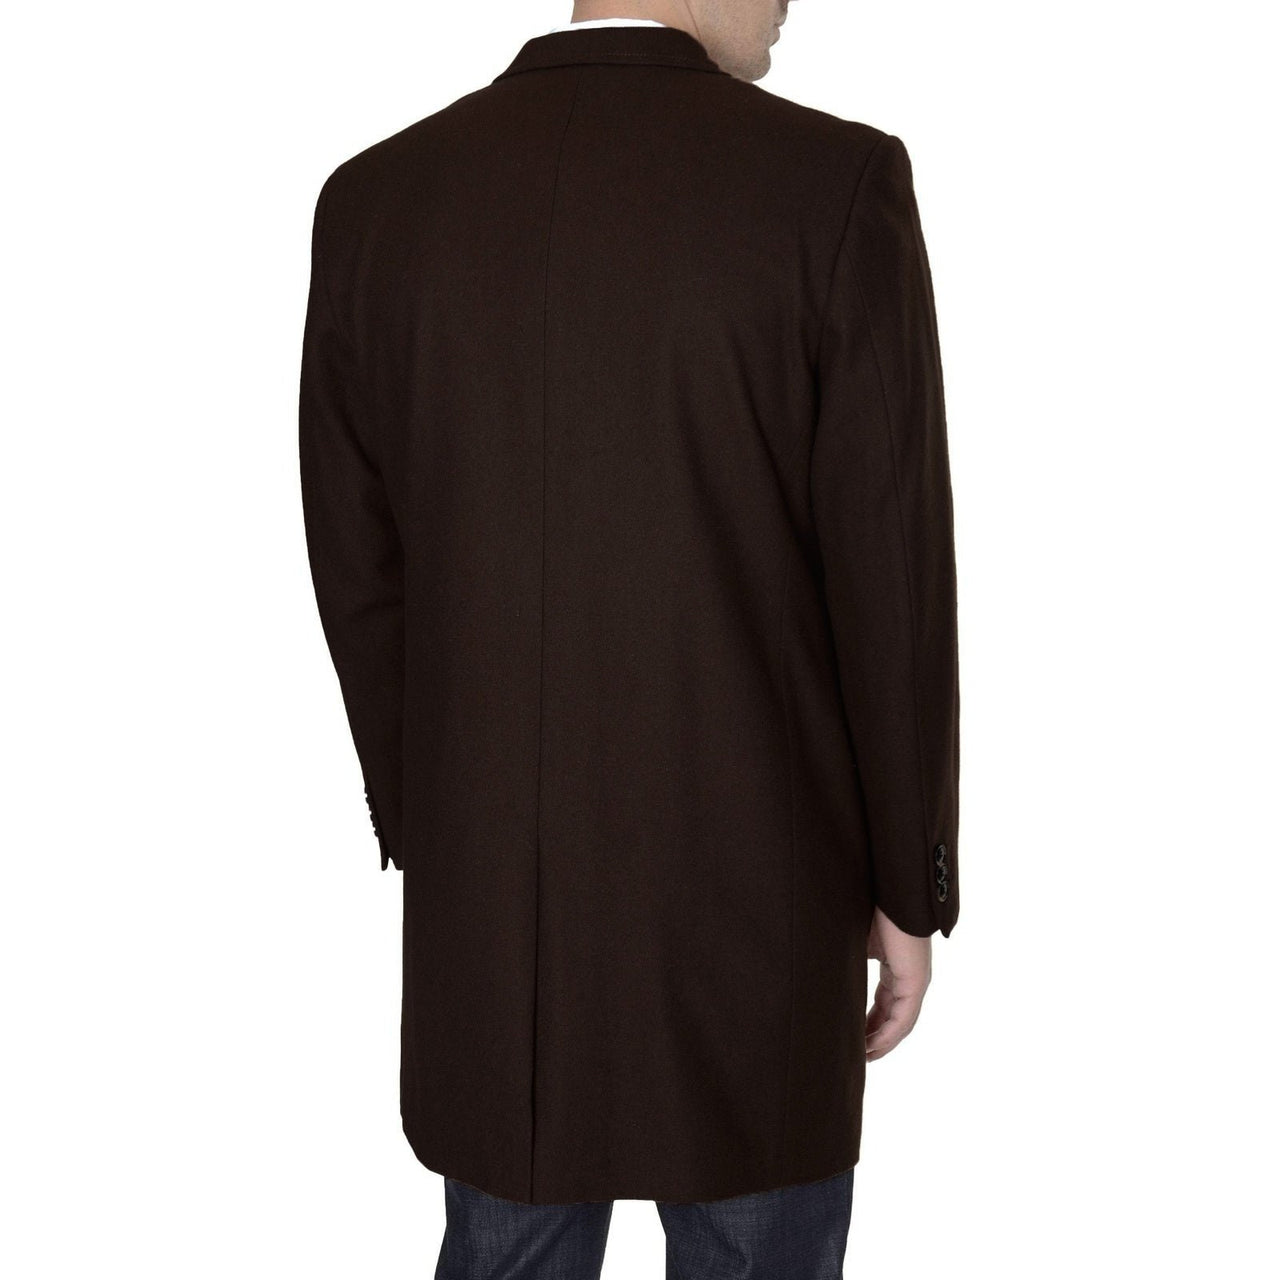 Men's Wool Cashmere Single Breasted Chocolate Brown 3/4 Length Car Coat Top Coat